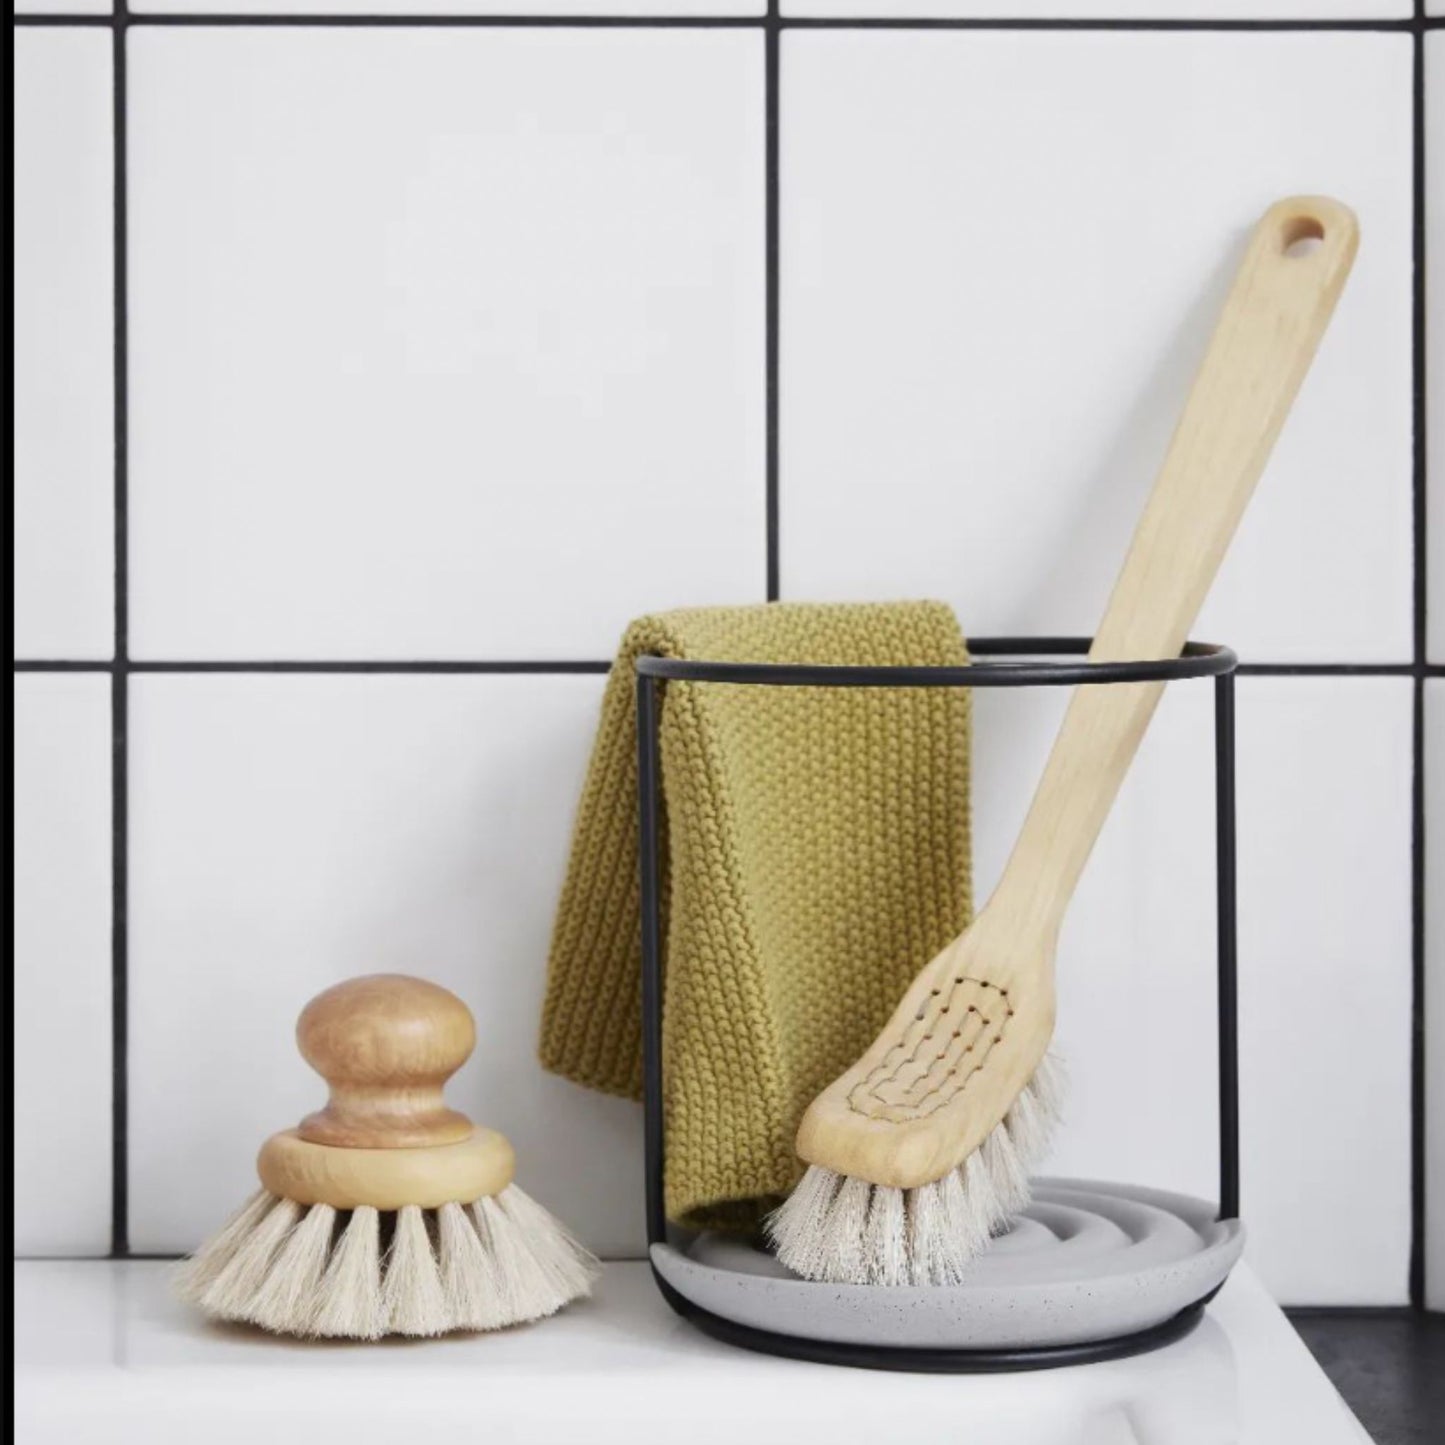 Metal and concrete stand for drying dish brushes. 